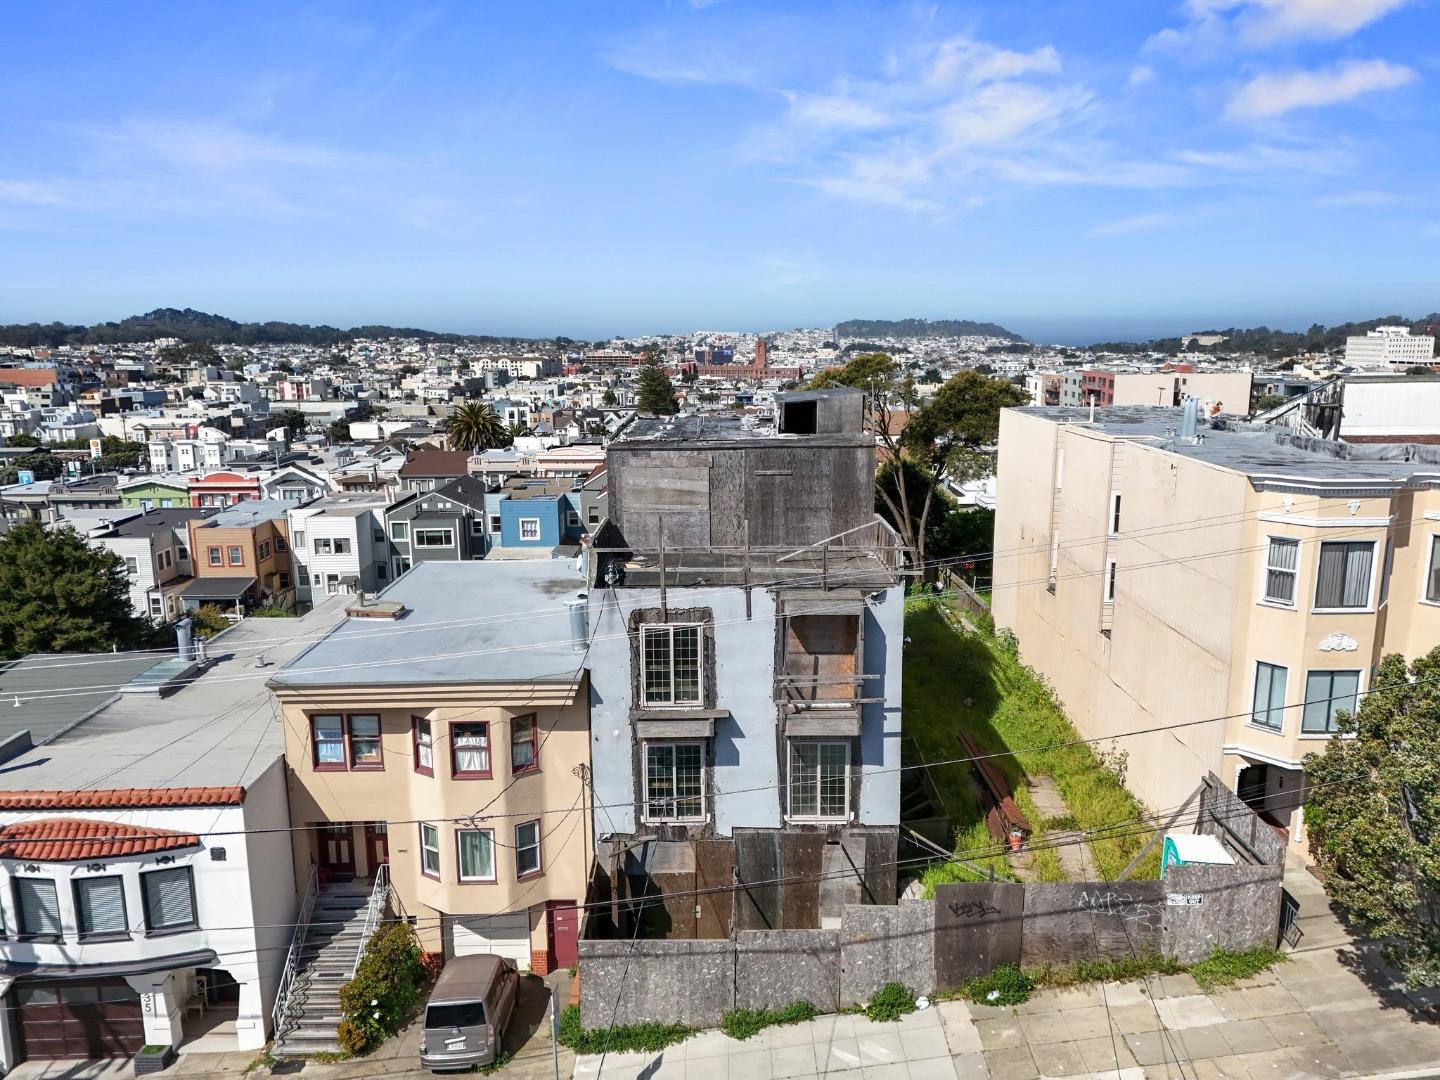 Photo of 21-23 Wood St in San Francisco, CA